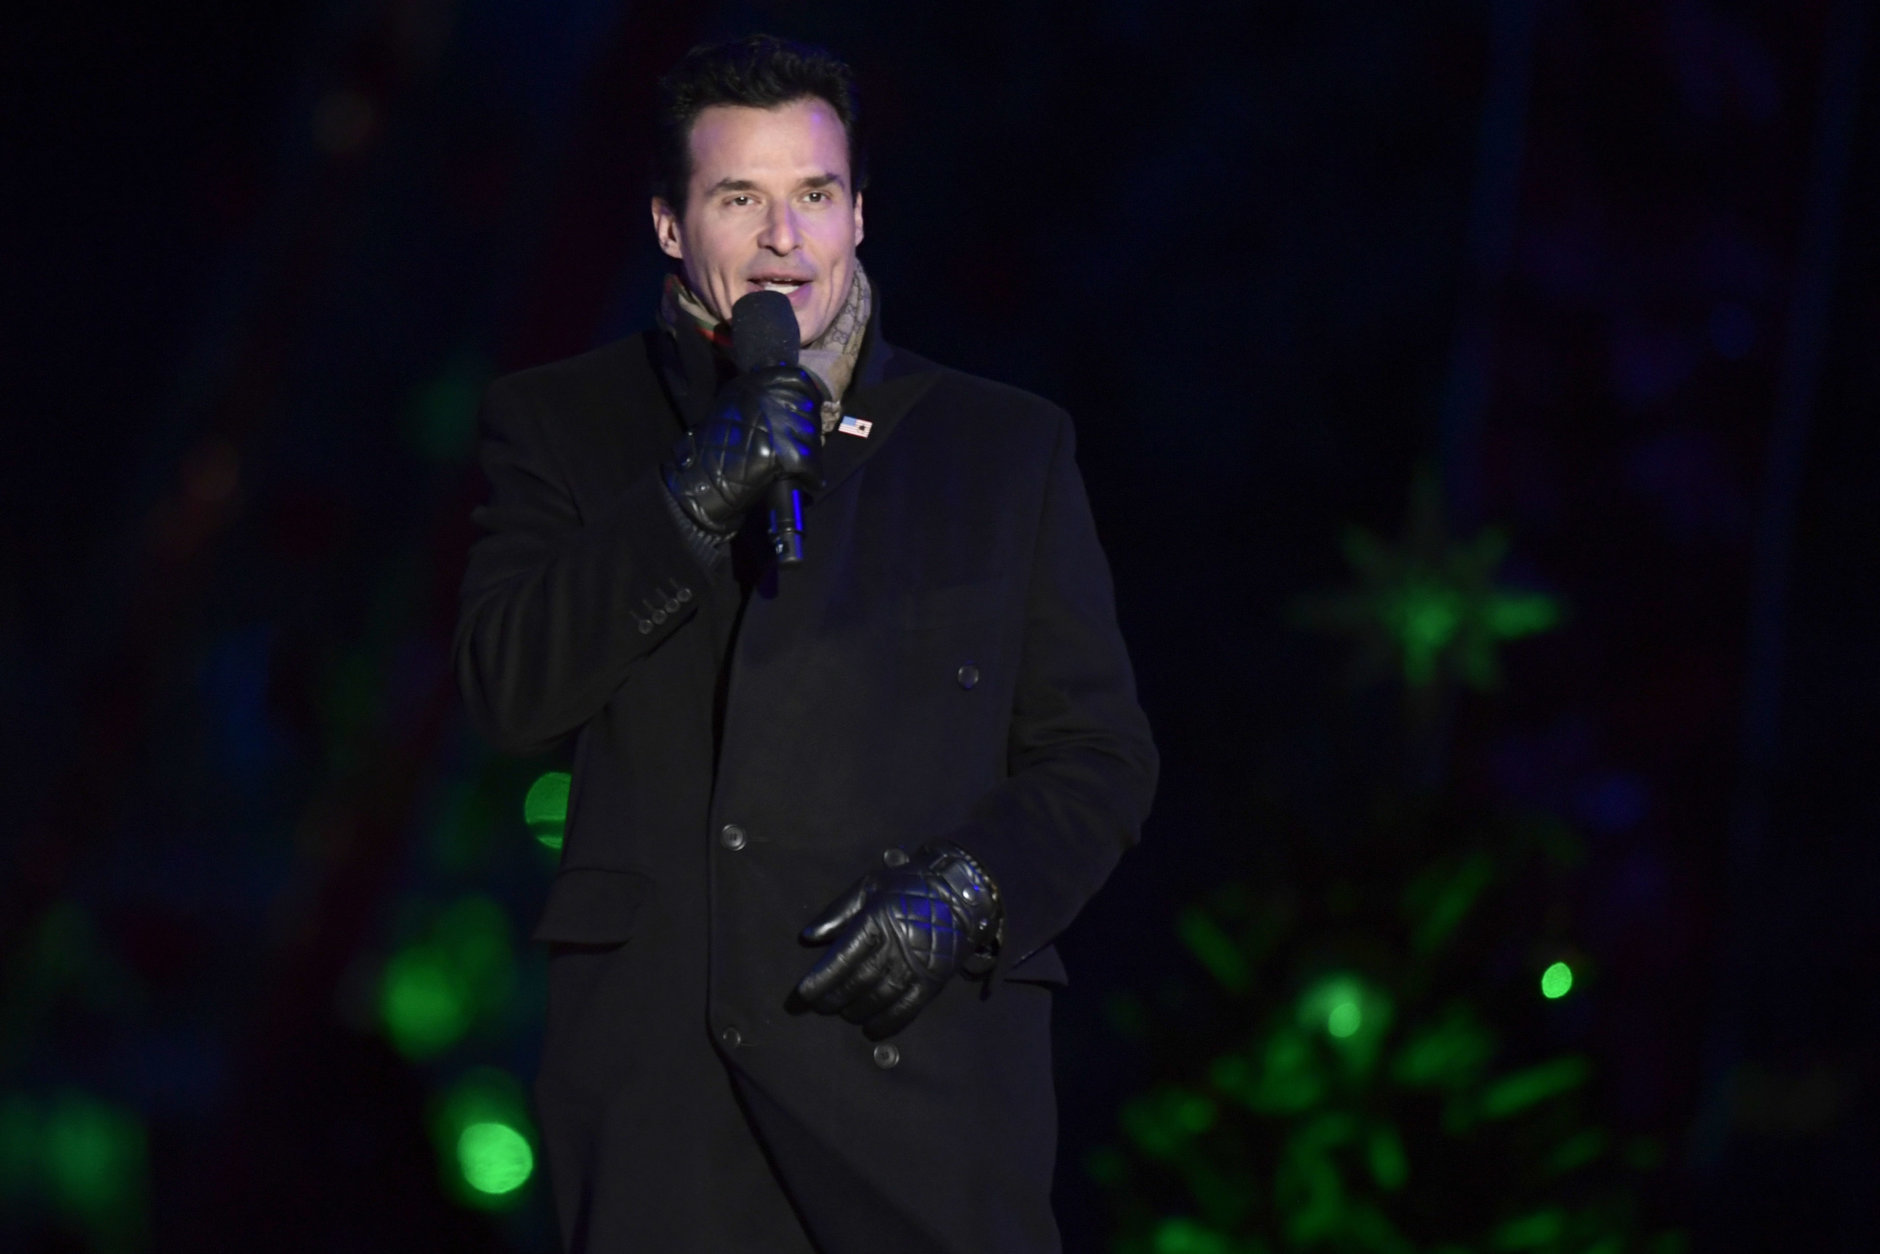 Host Antonio Sabato, Jr. speaks during the annual National Christmas Tree Lighting ceremony on the Ellipse in Washington, Wednesday, Nov. 28, 2018. President Donald Trump and first lady Melania Trump attended for the lighting of the tree.. (AP Photo/Susan Walsh)